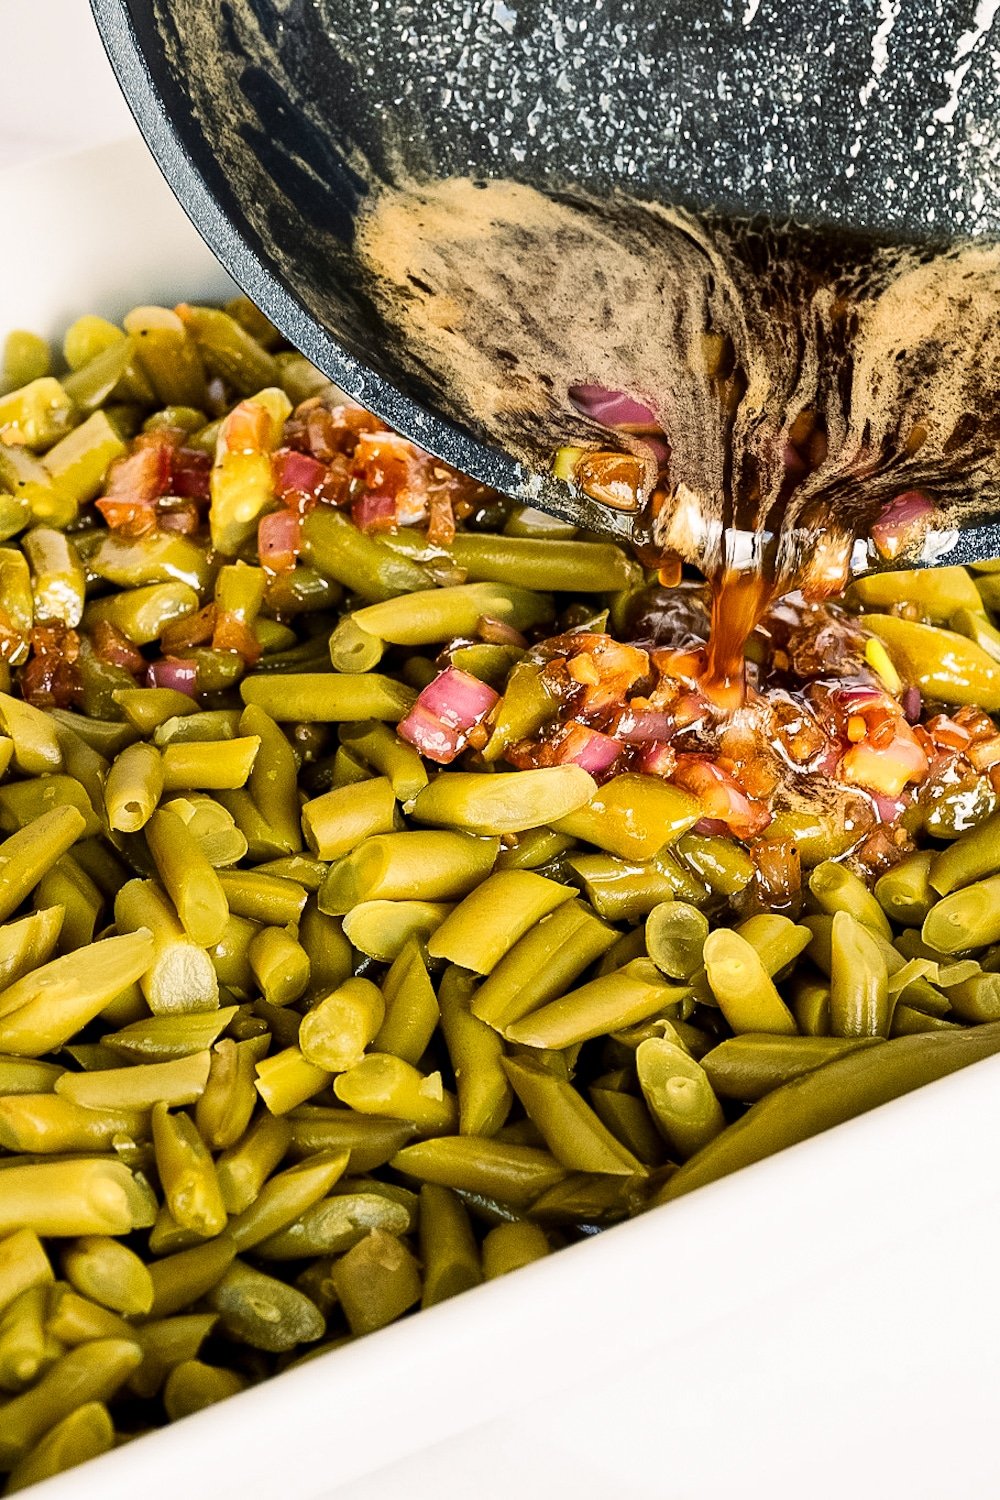 Pouring the flavorful bacon and seasoning mixture over the arranged green beans to create the irresistible crack green beans casserole.